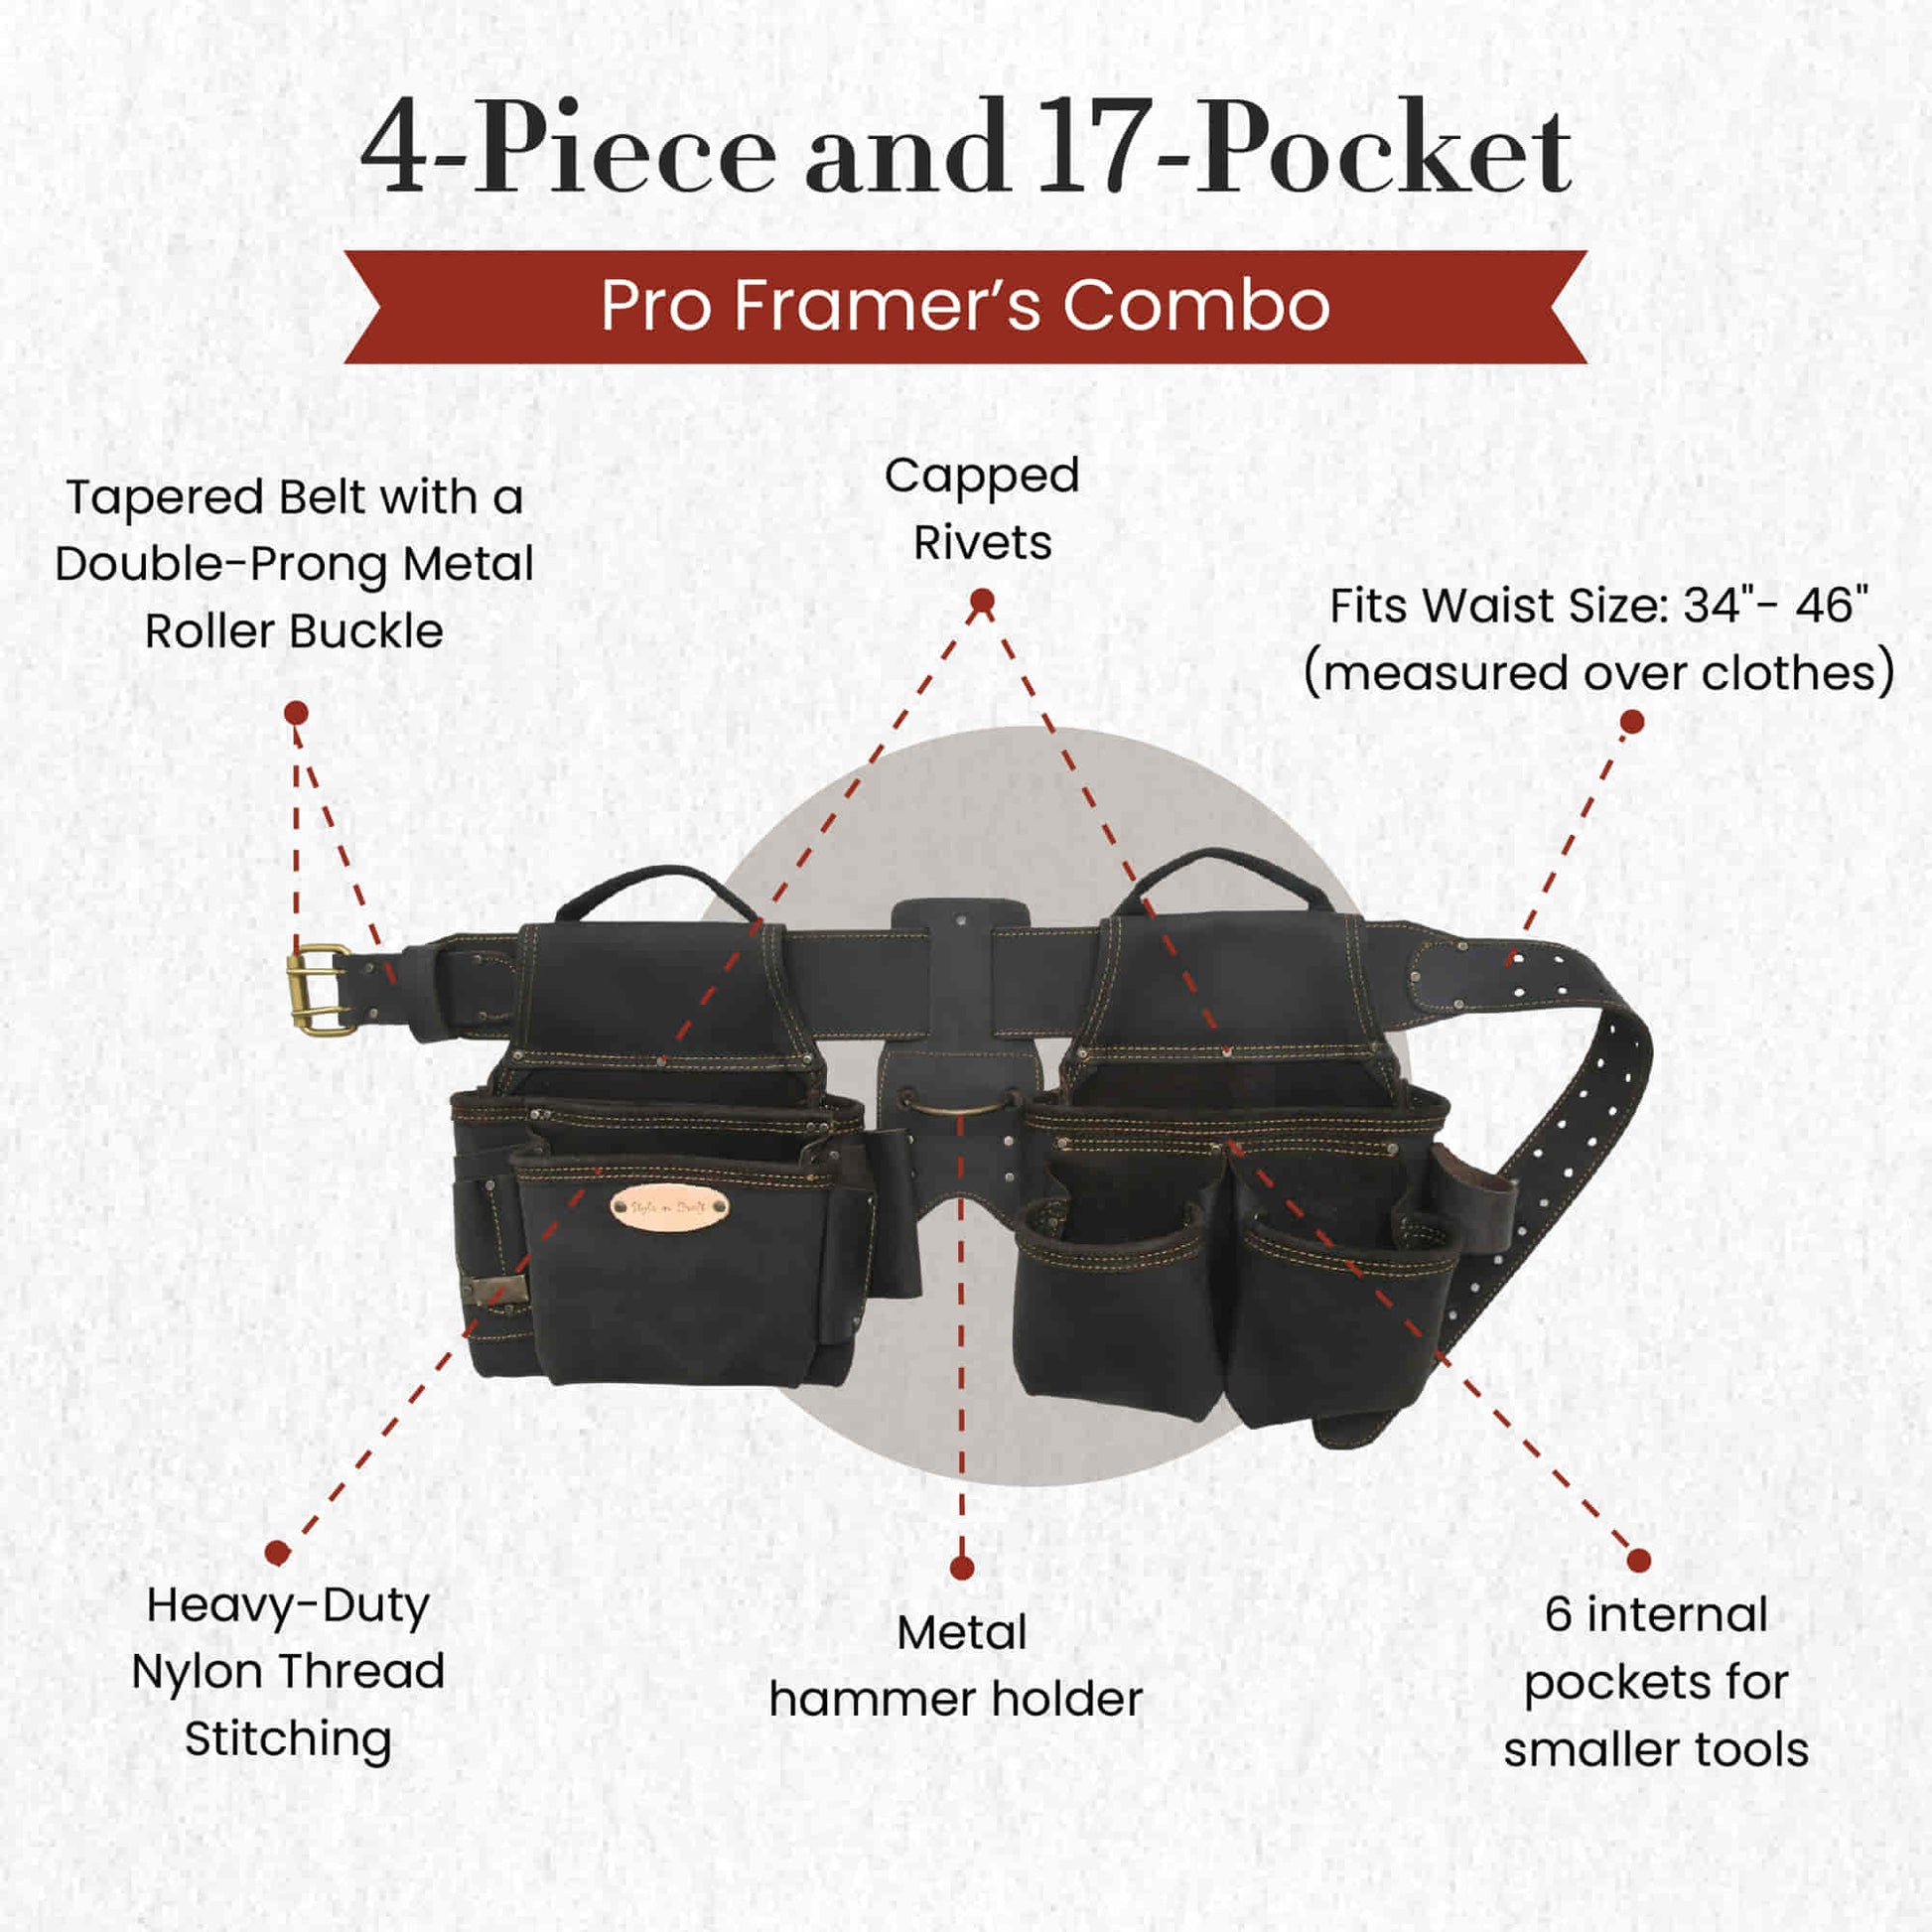 Style n Craft 90429 - 4 Piece 17 Pocket Pro Framer’s Combo in Dark Brown Color Full Grain Oiled Leather with 3 inch wide Tapered Leather Belt with Double Prong Metal Roller Buckle - Front View Showing the Details